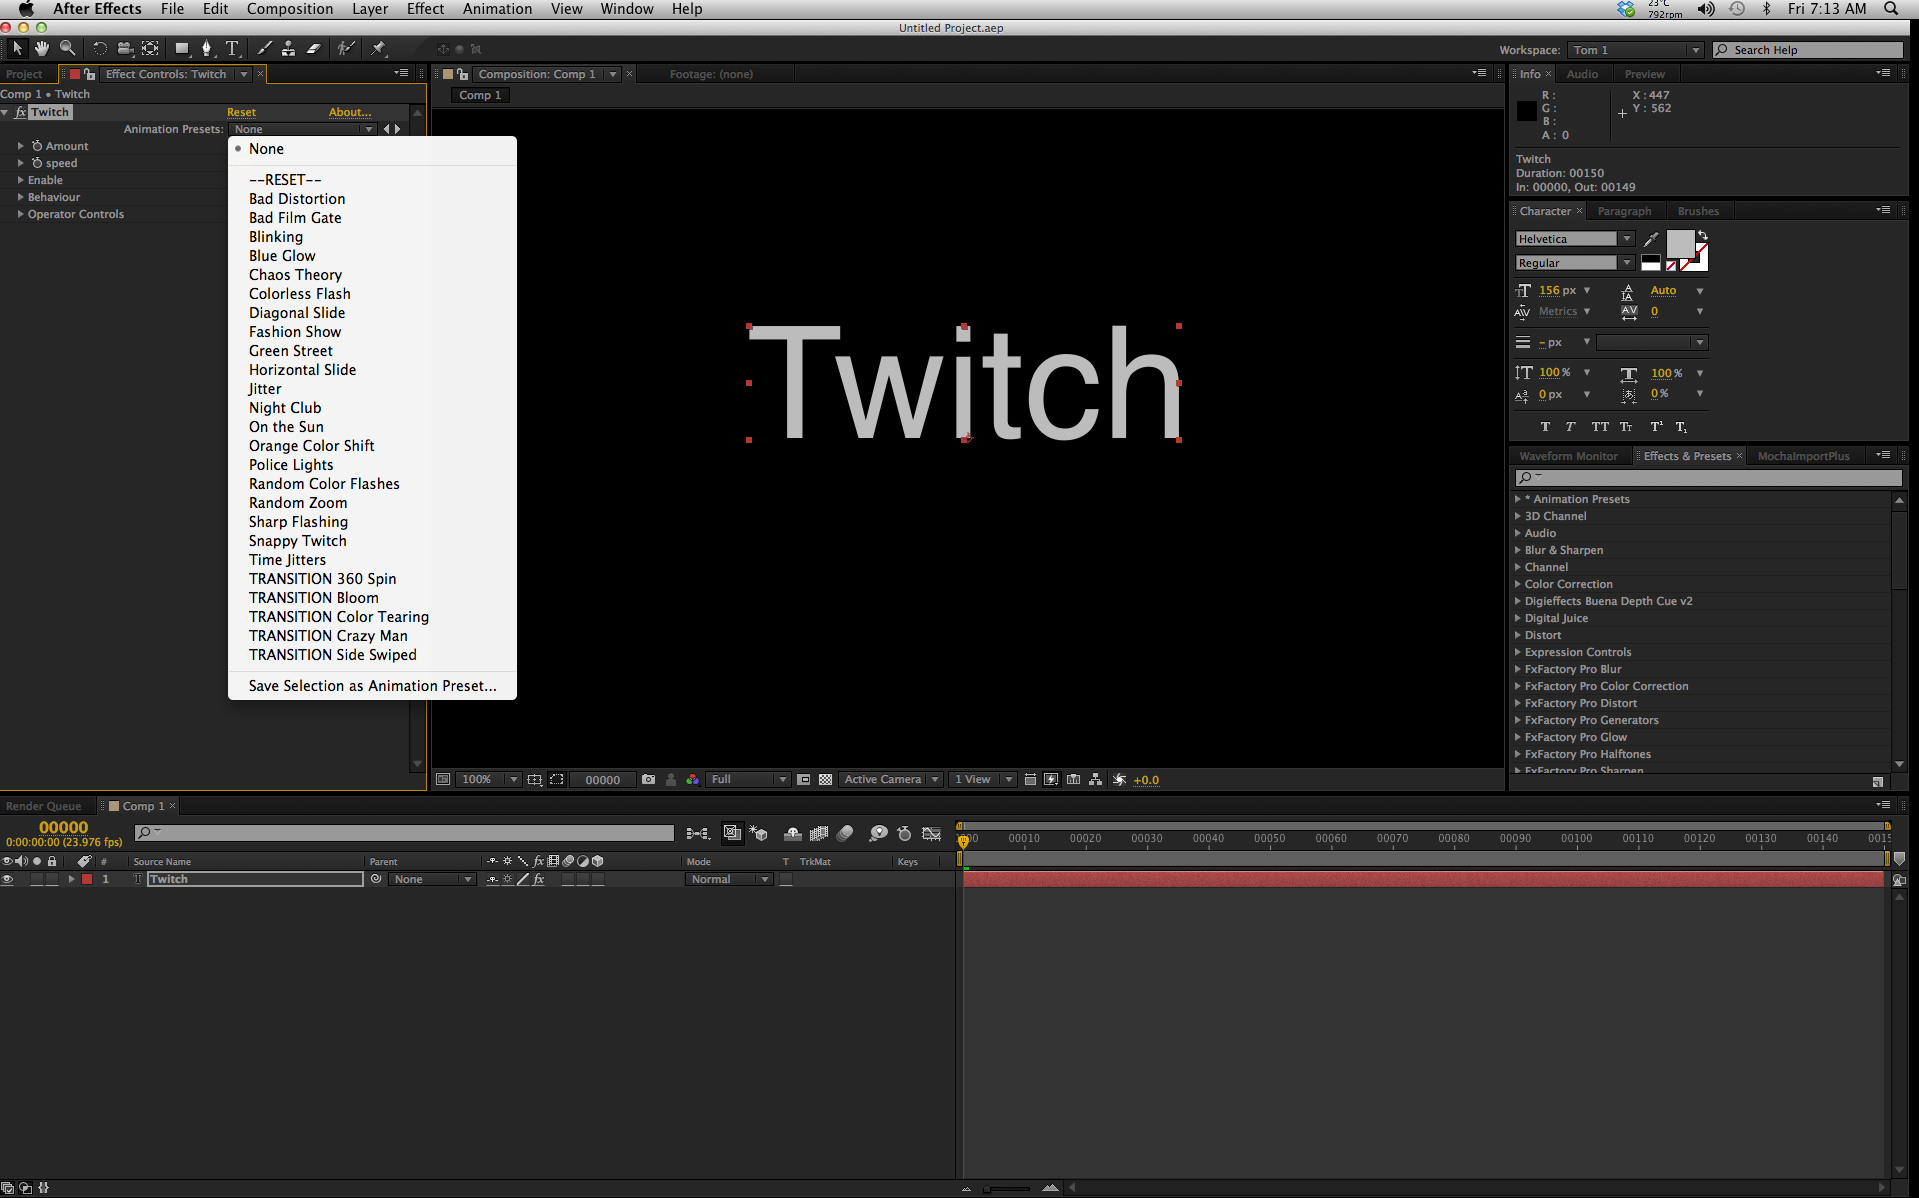 twitch after effects cc 2018 free download